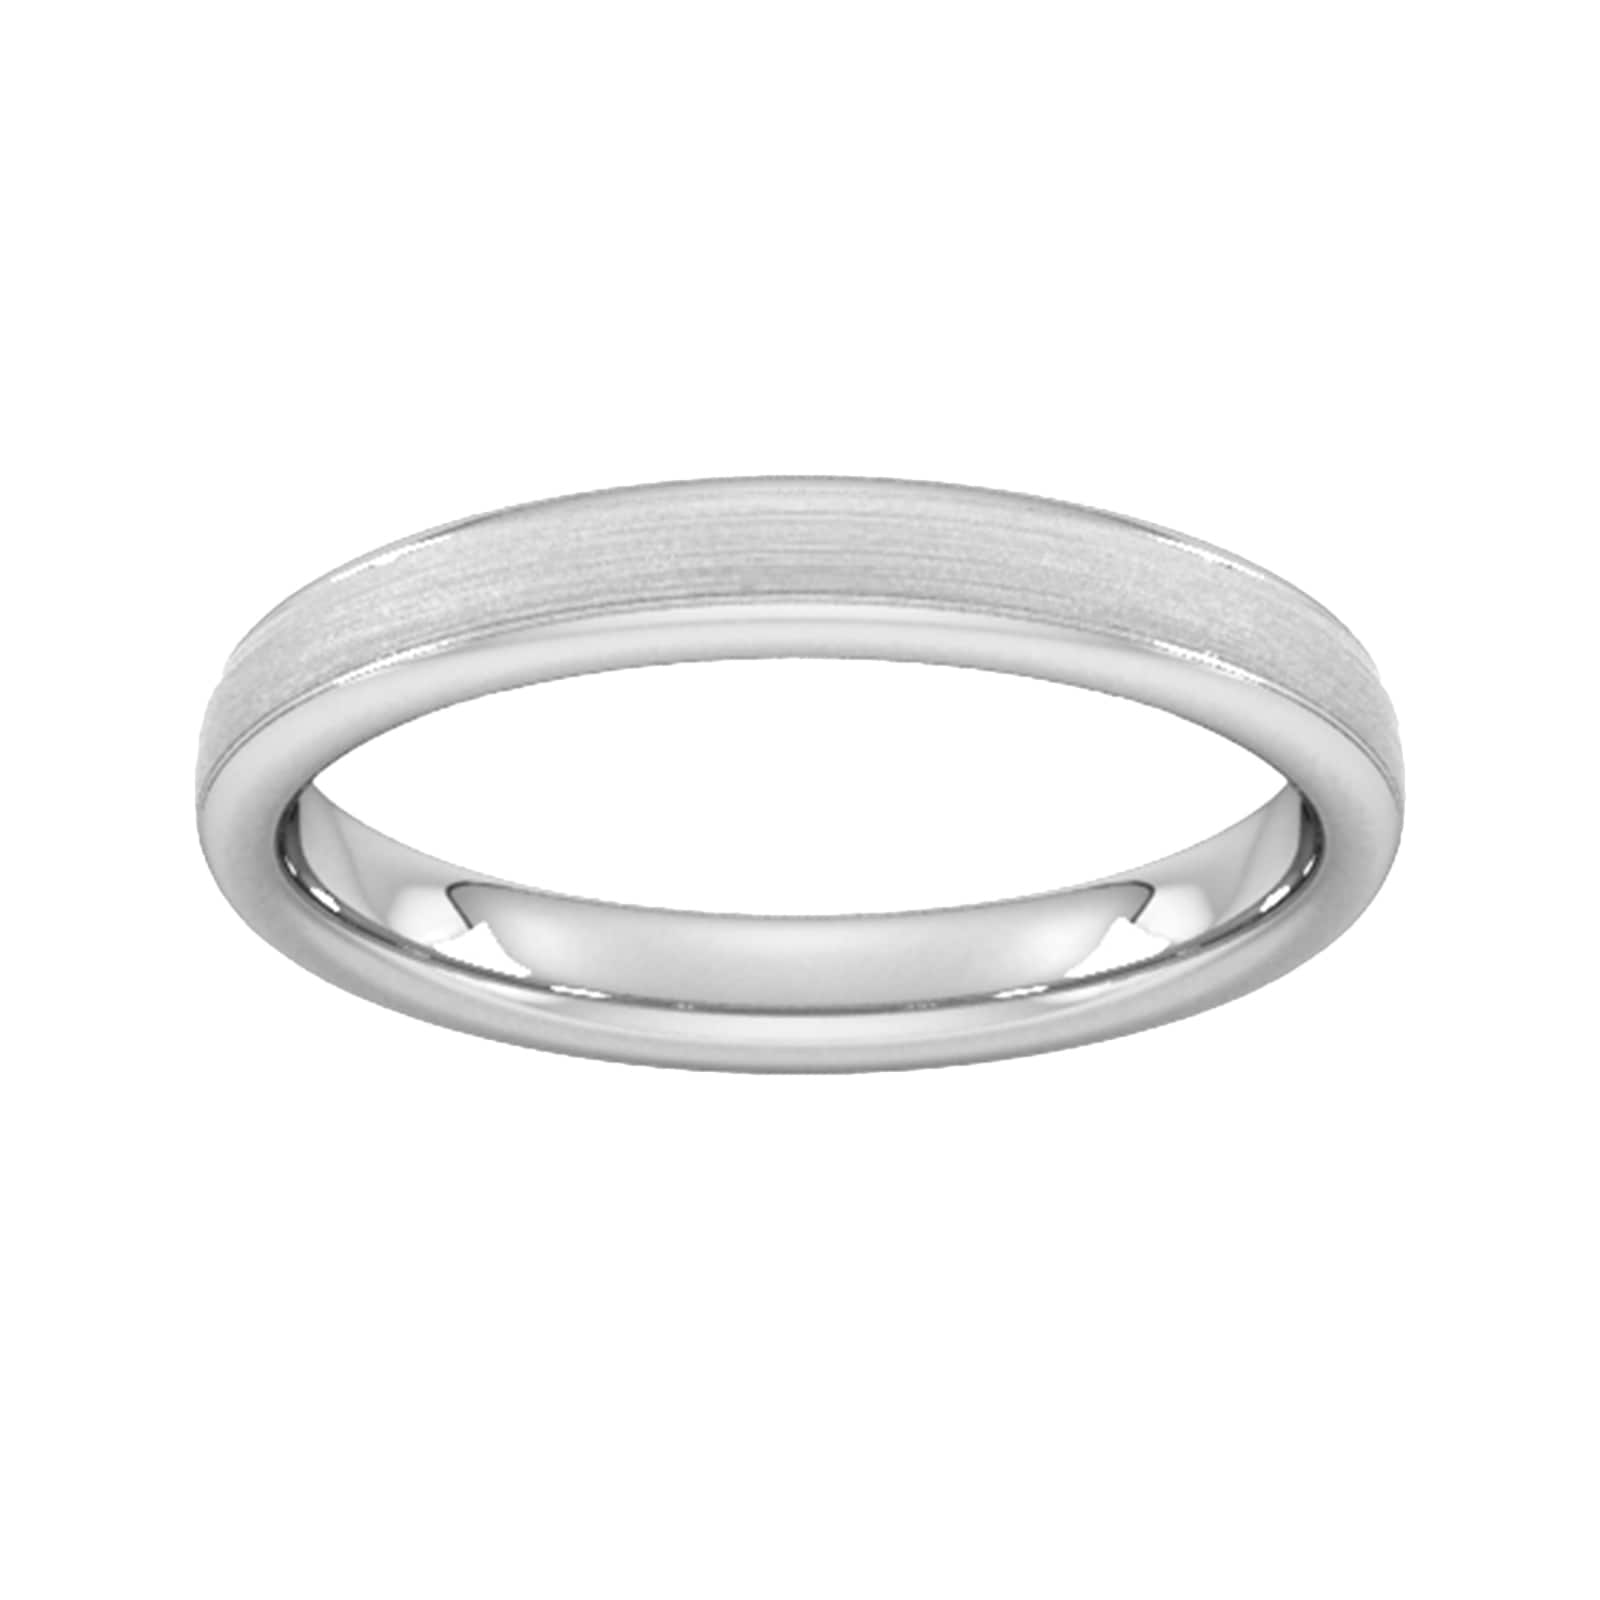 3mm Traditional Court Standard Matt Centre With Grooves Wedding Ring In 18 Carat White Gold - Ring Size K